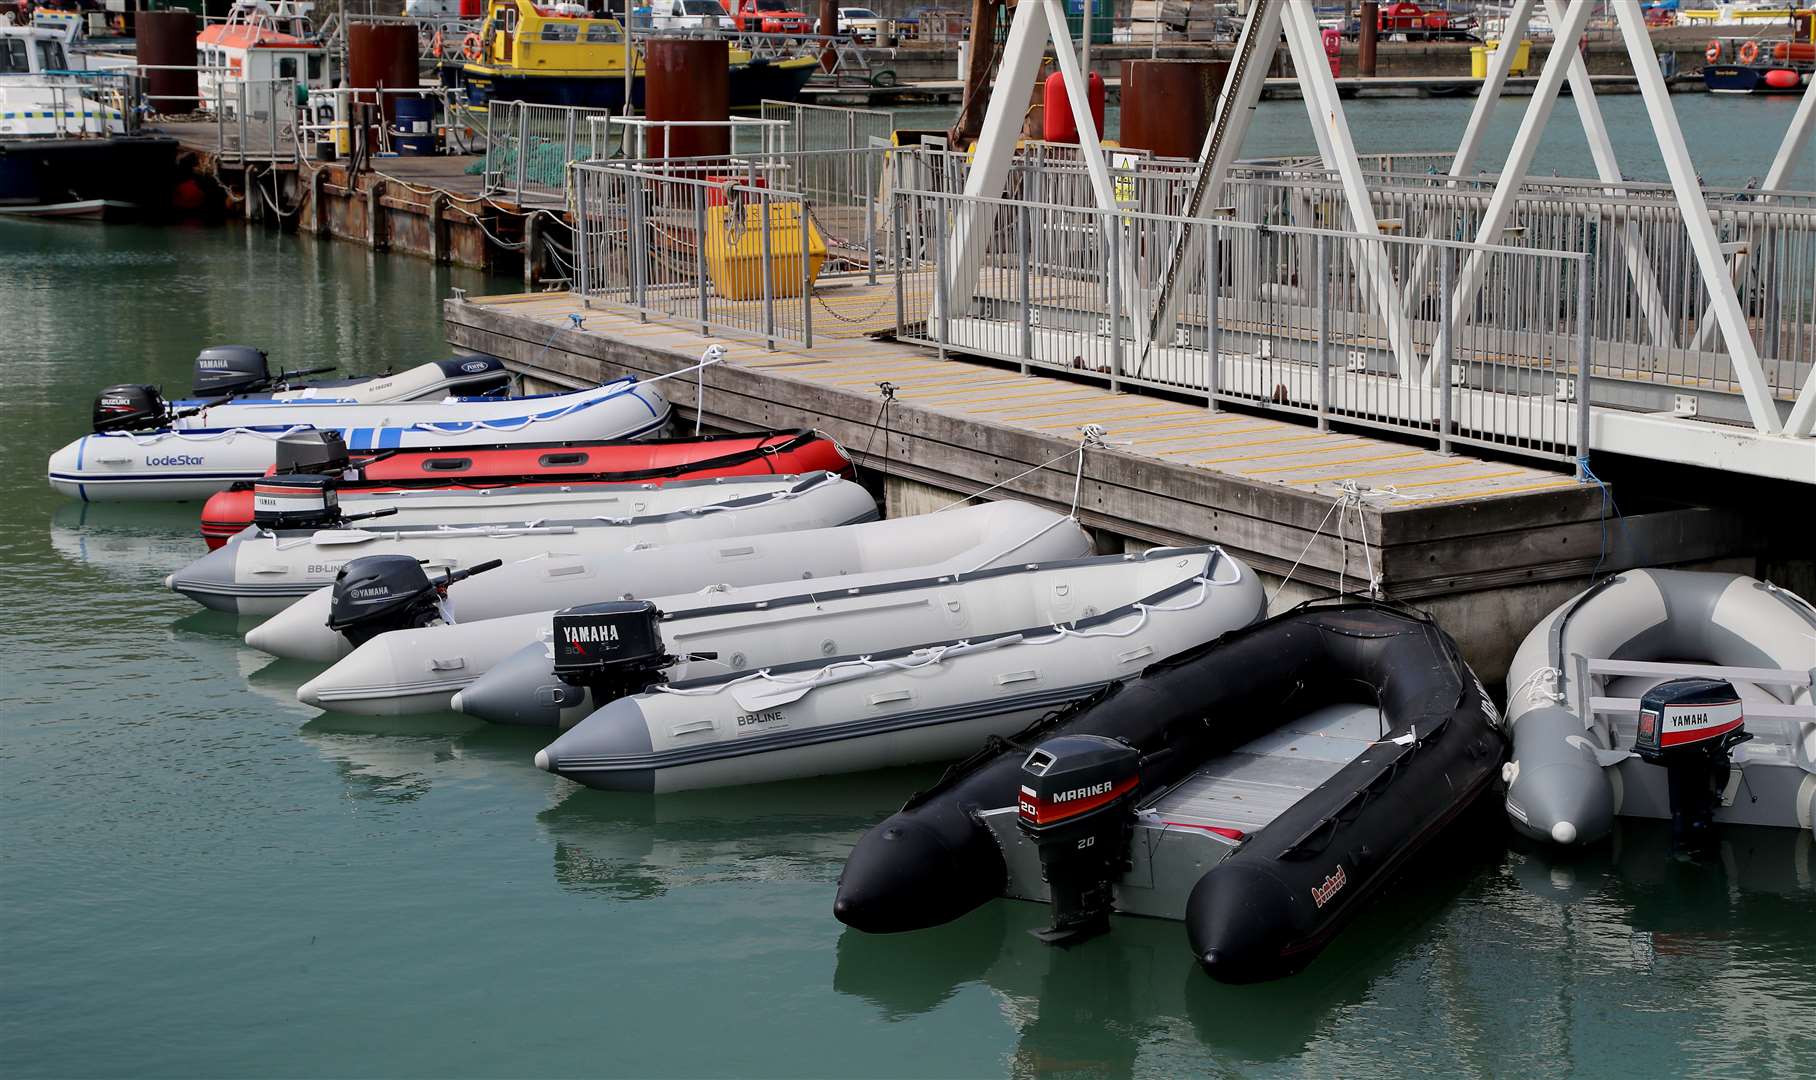 A view of dinghies tied up at The Port of Dover in Kent following being seized by Border Force officers